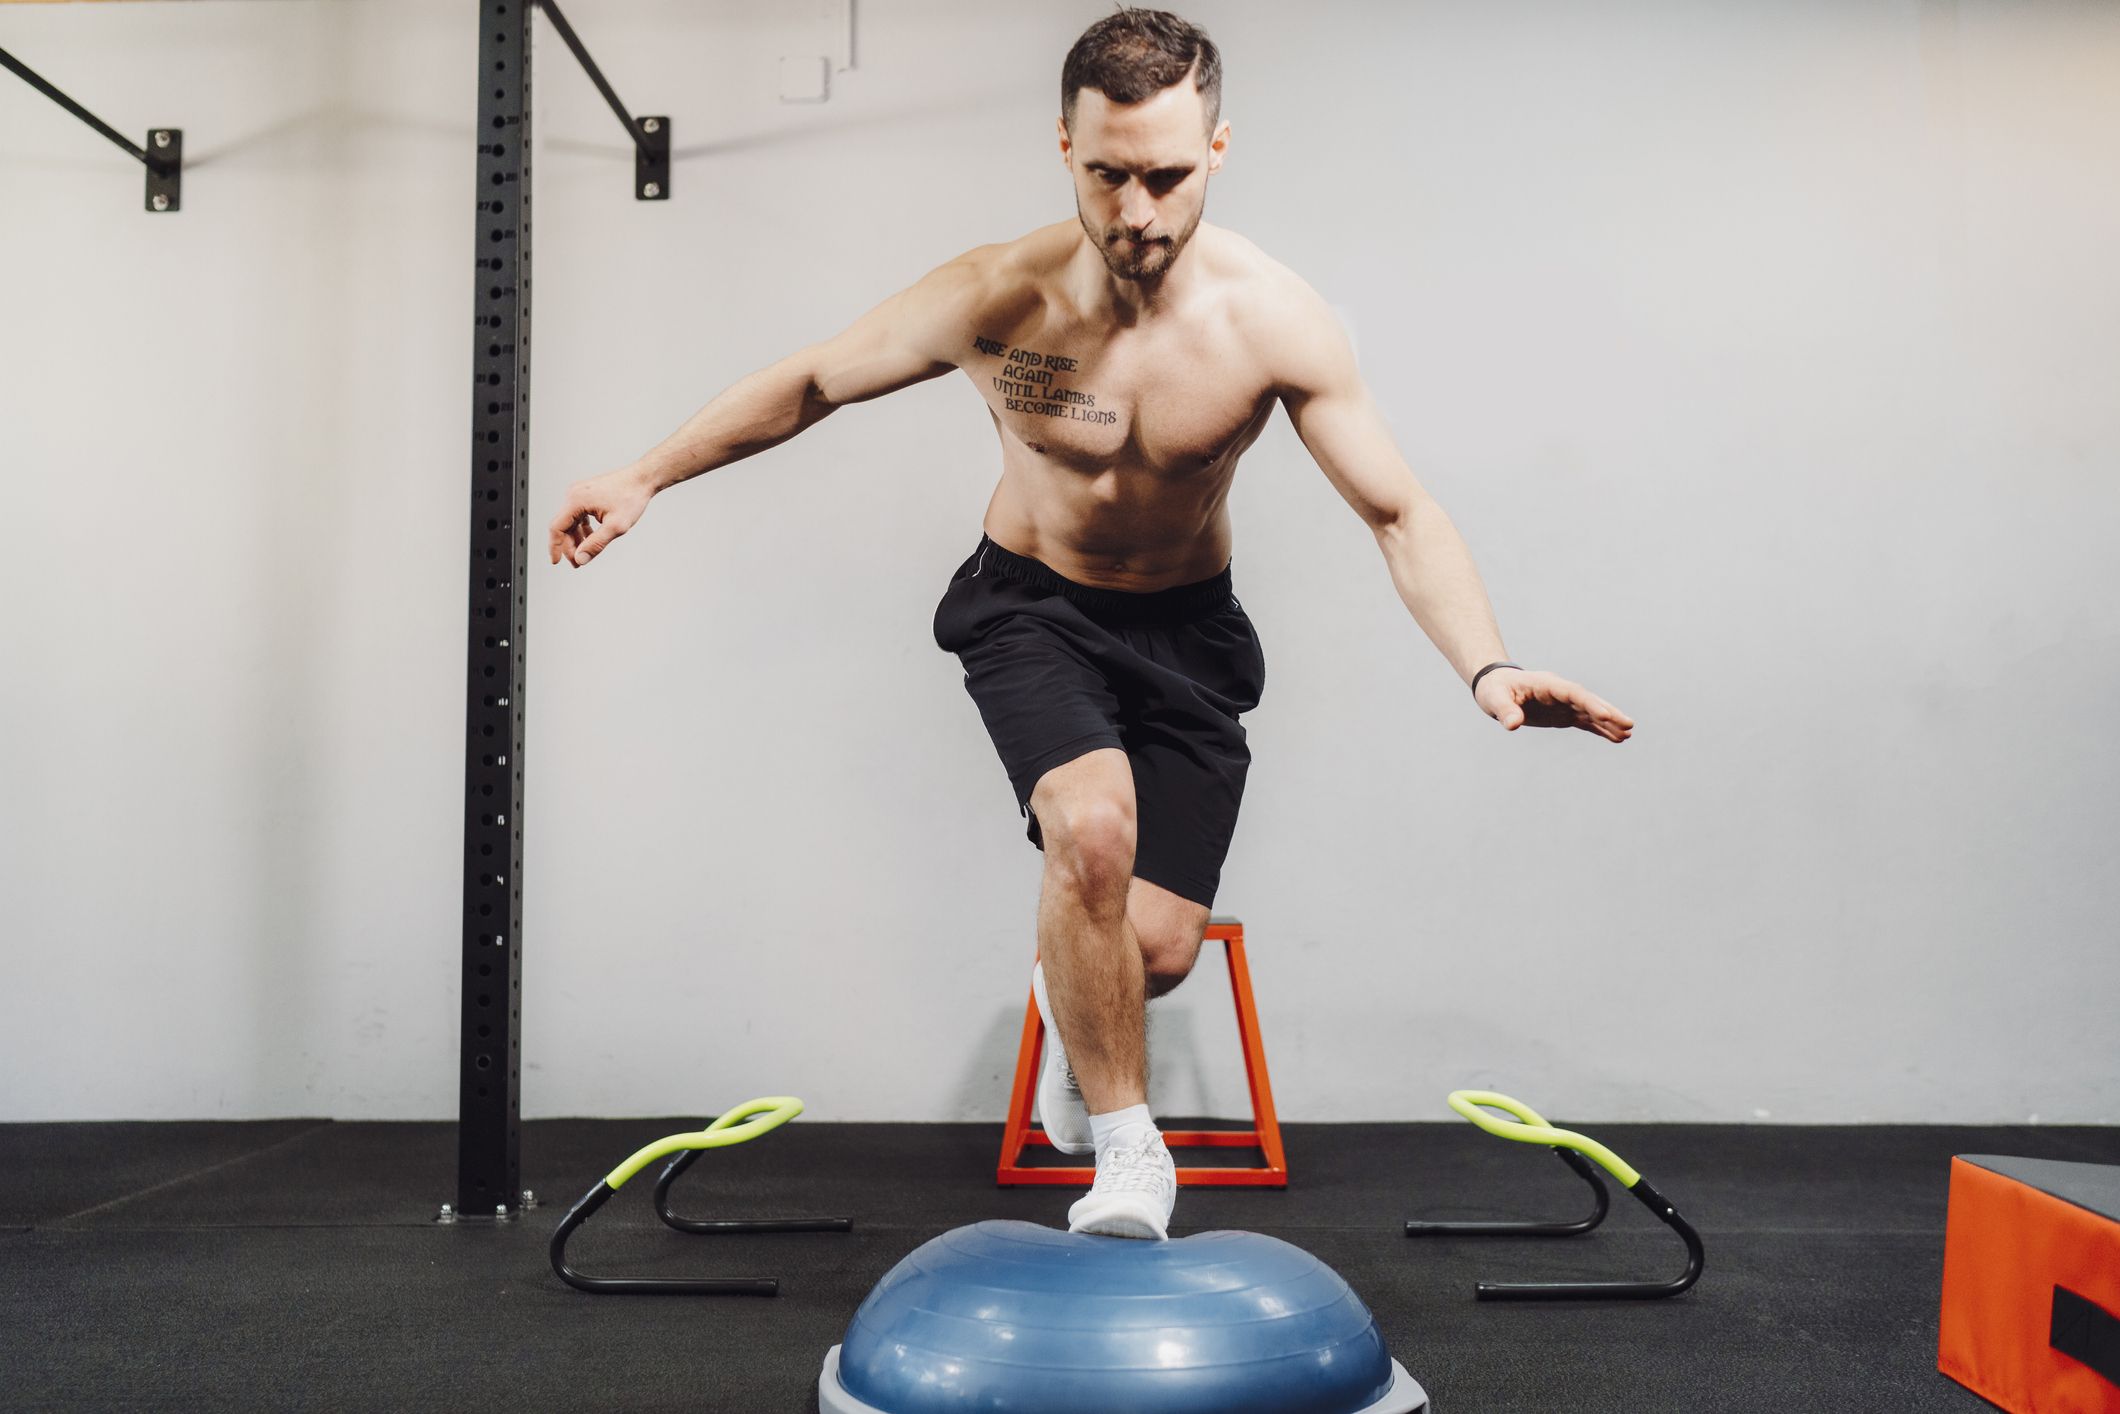 10 Balance Improving Exercises for Workouts to Improve Stability